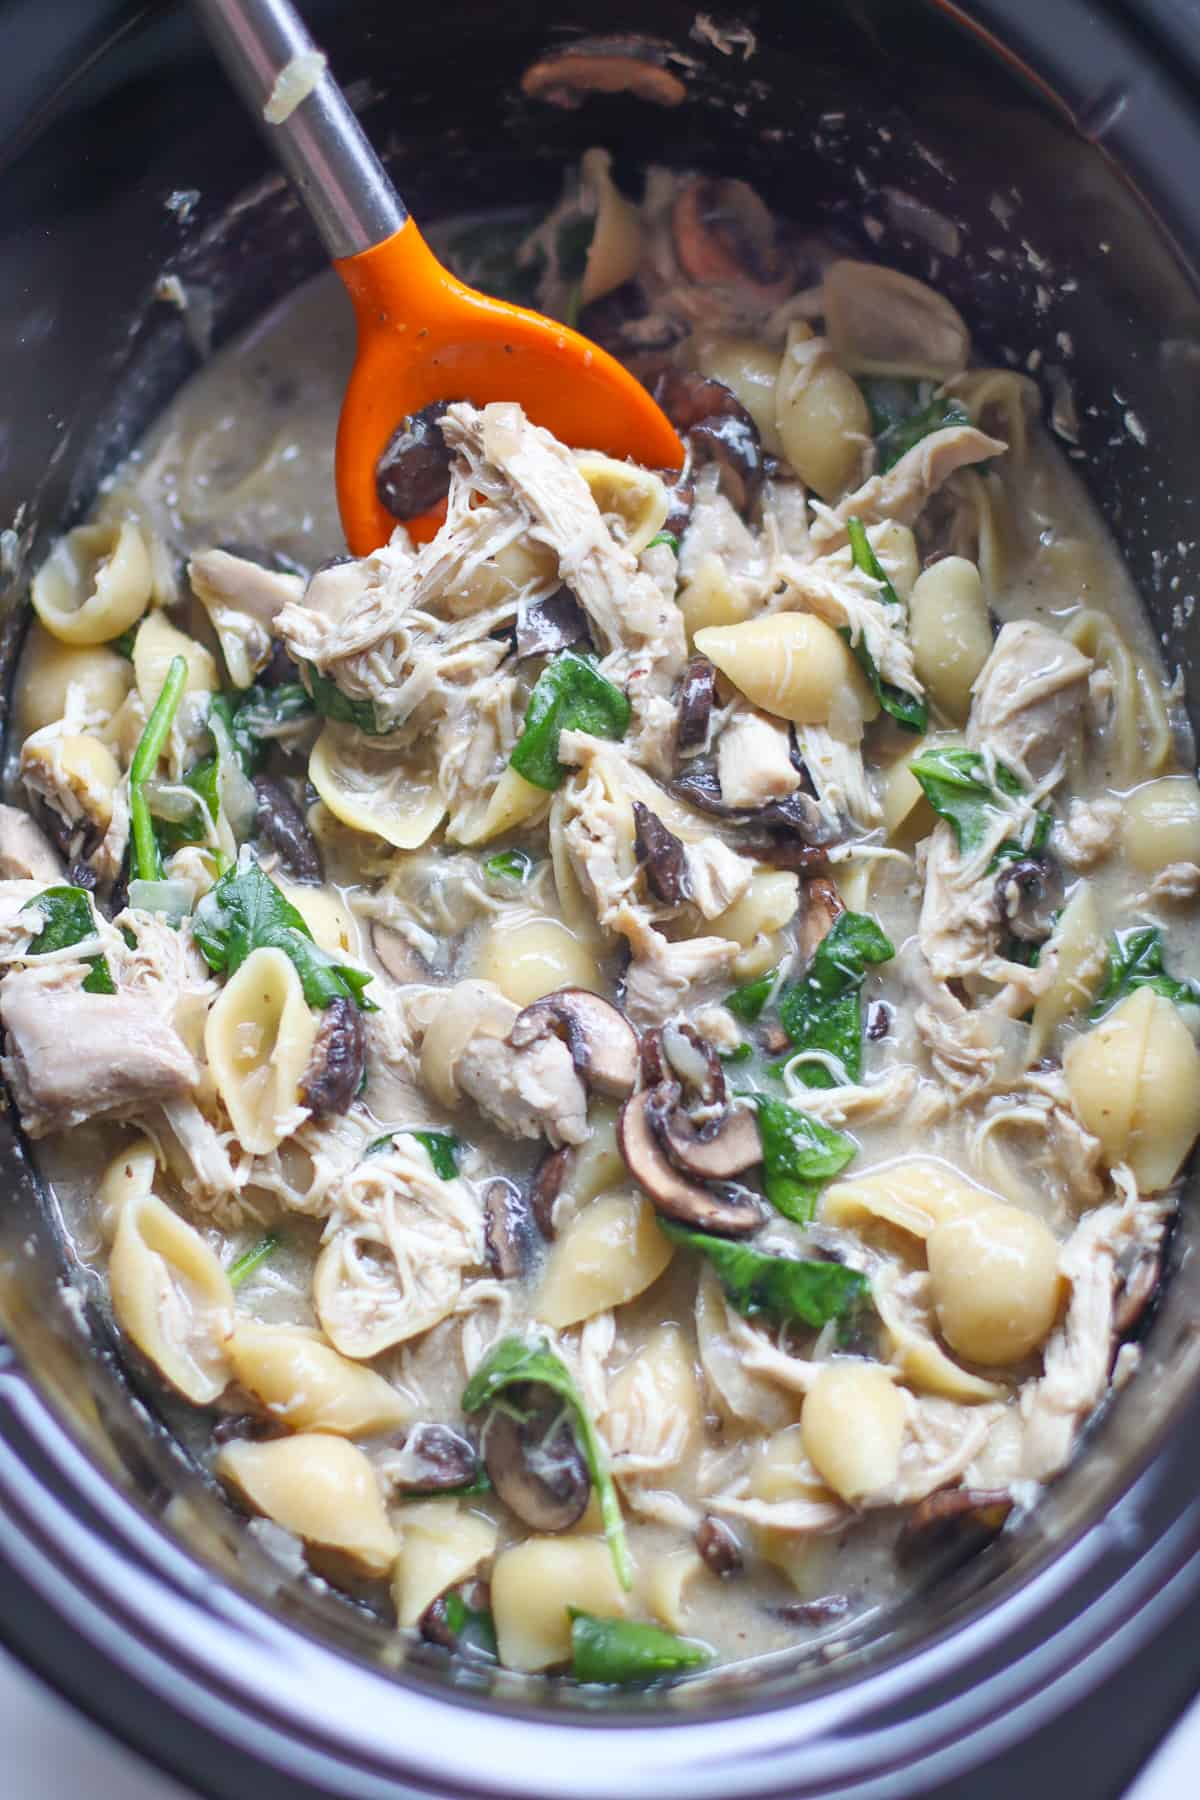 Cooked chicken and mushrooms in slow cooker.